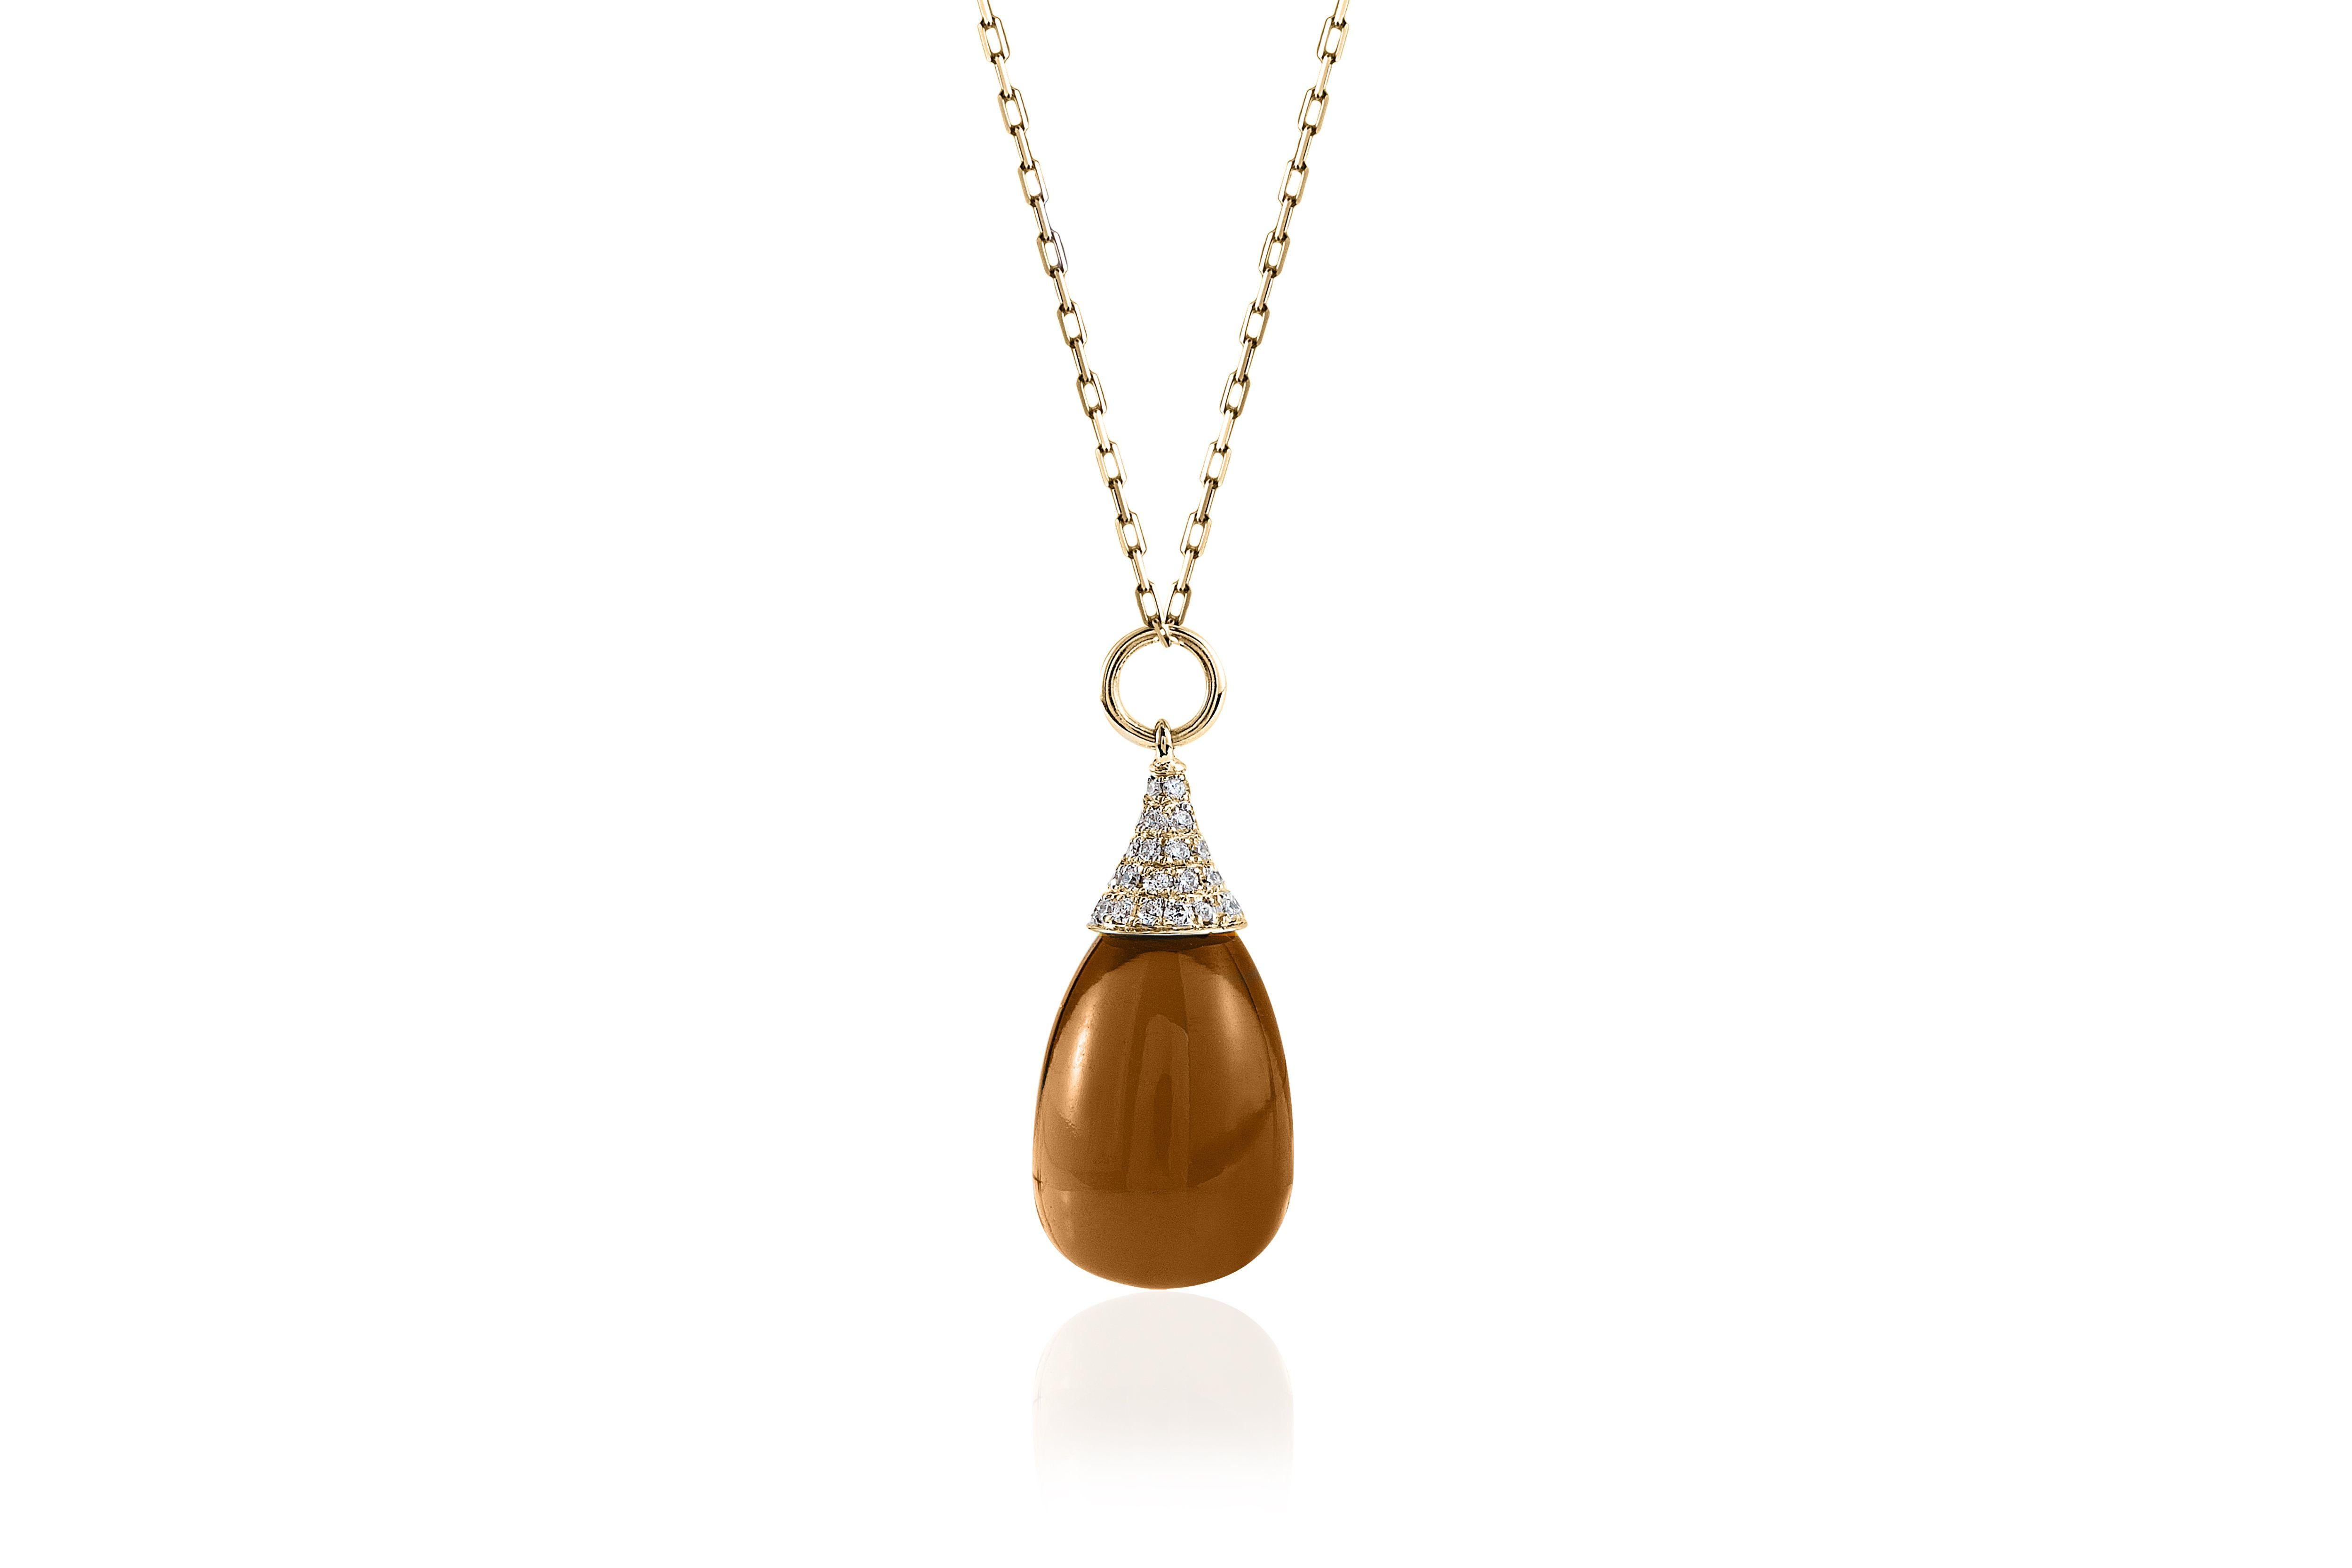 Cognac Drop Pendant with Diamond Cap in 18K Yellow Gold on an 18'' Chain from 'Naughty' Collection
 Stone Size: 19 x 12 mm 
 Diamonds: G-H / VS, Approx Wt:0.32 Cts